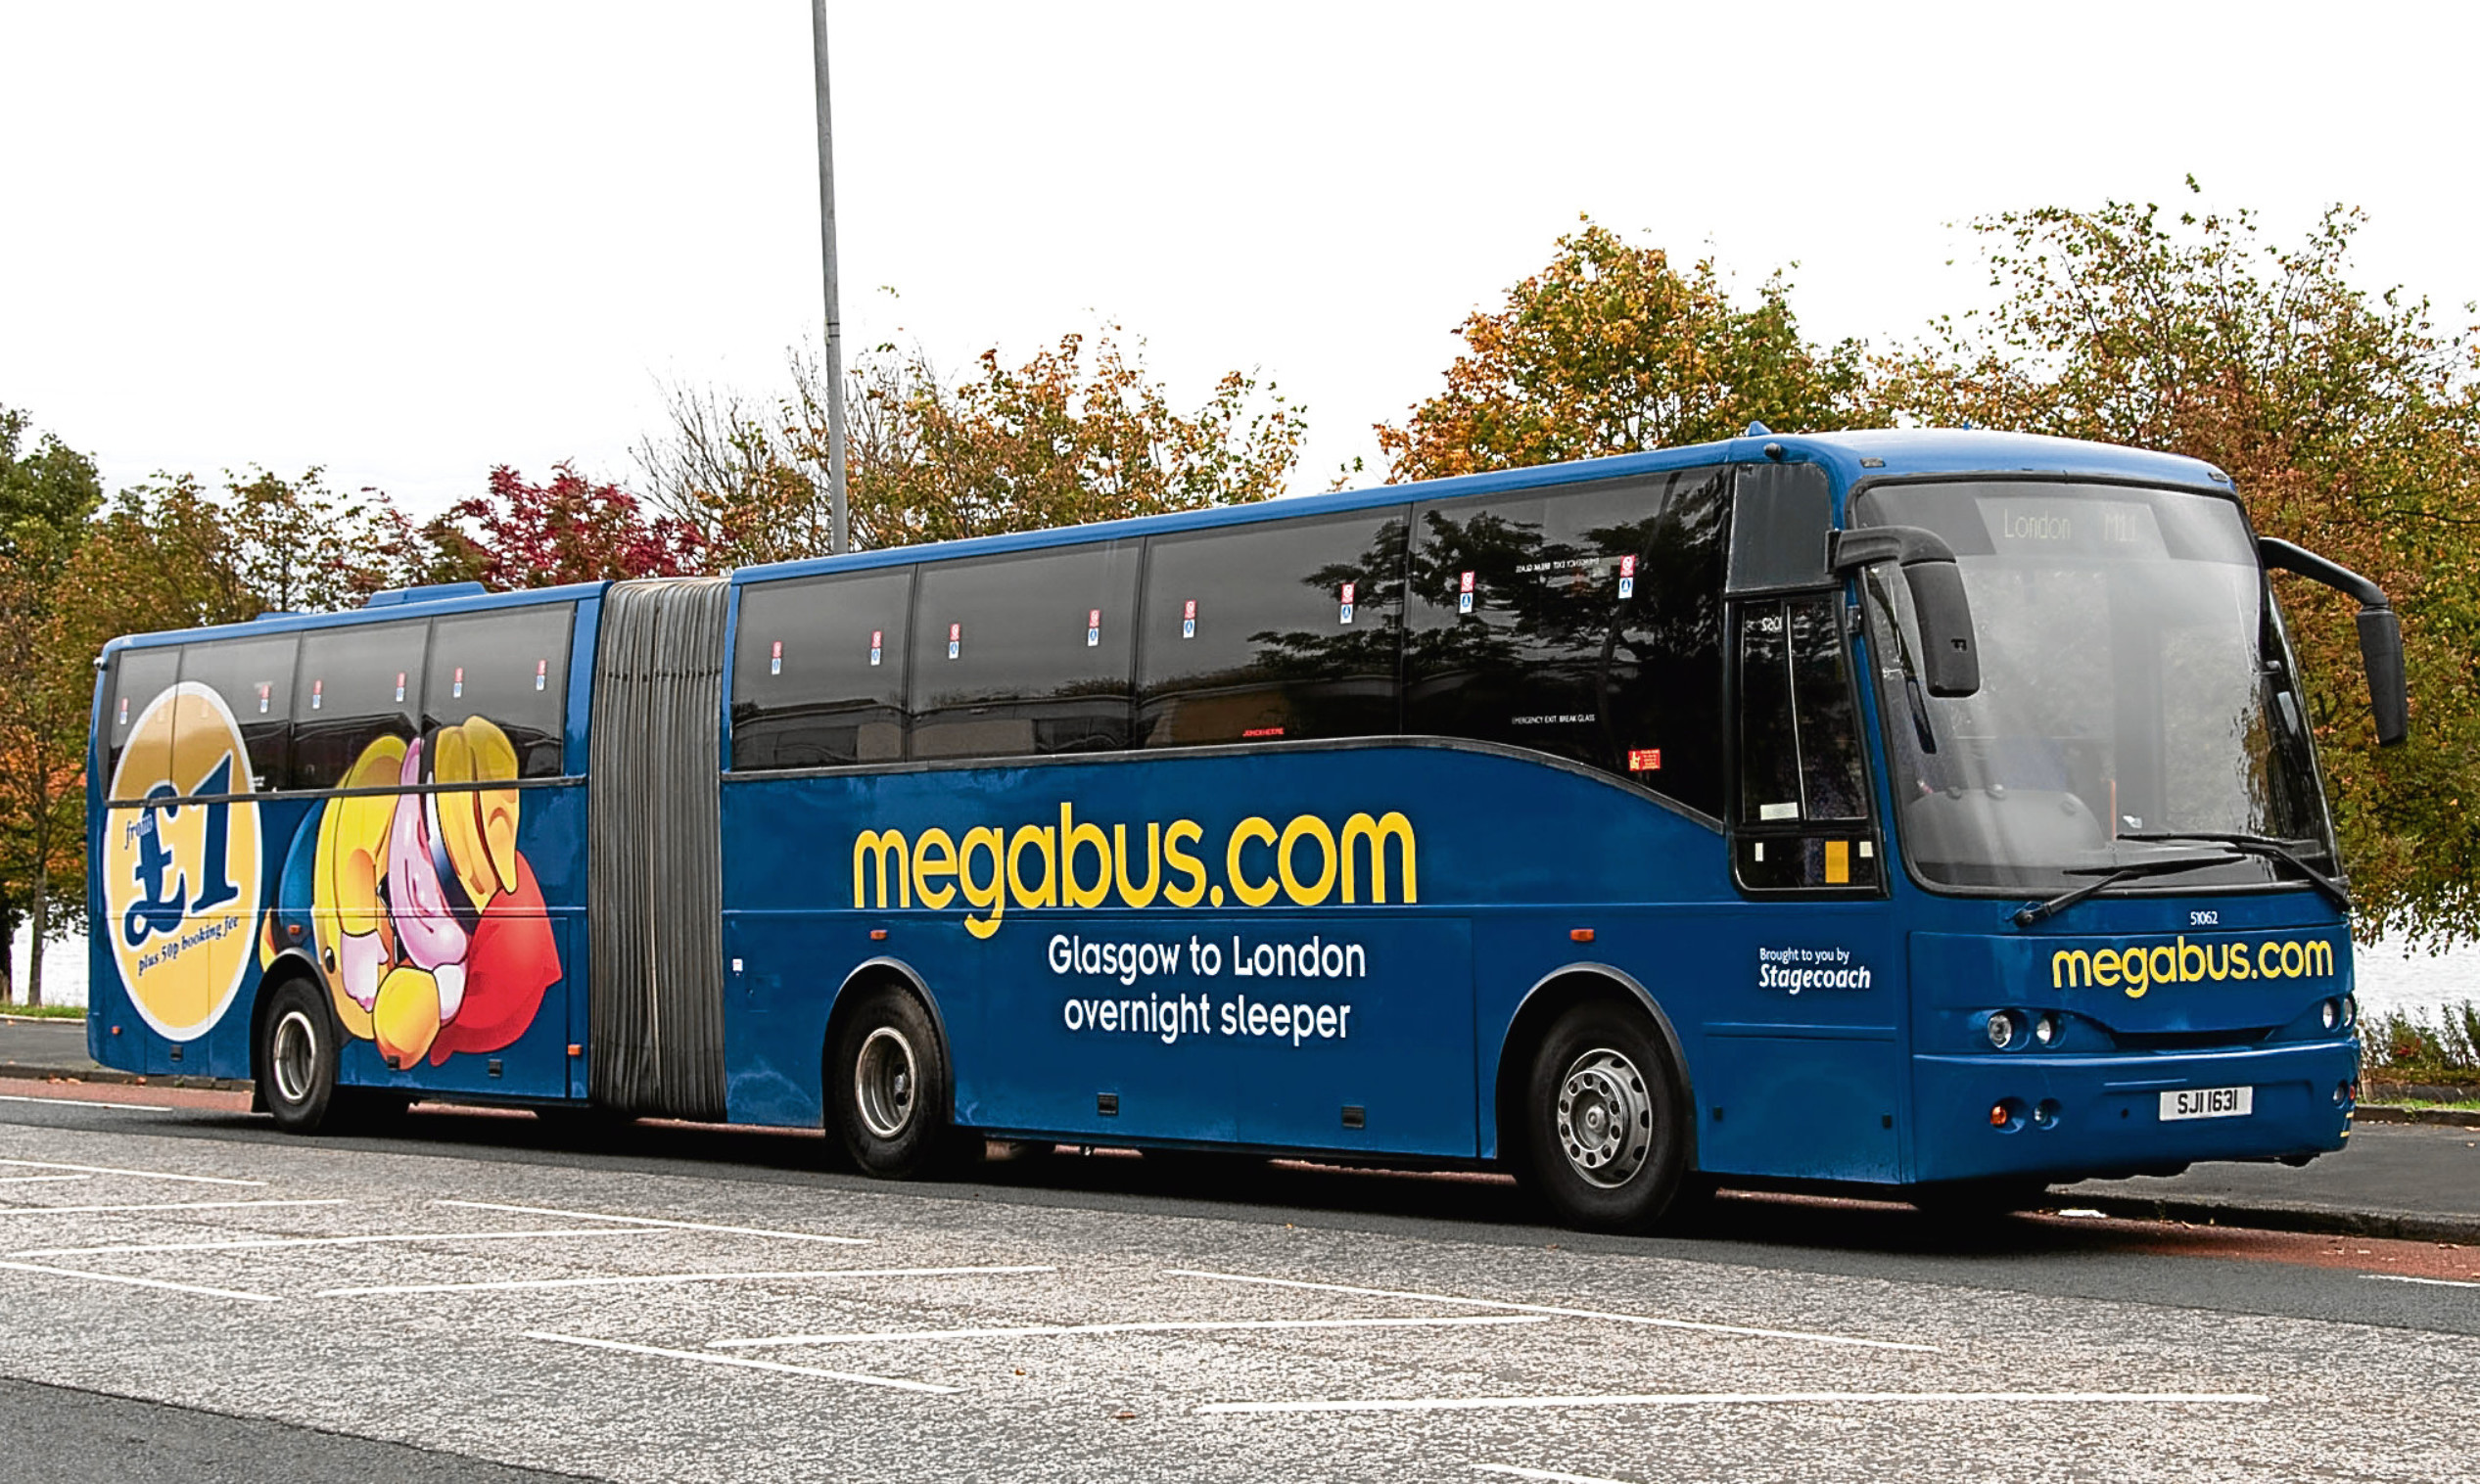 There has been a downturn in the UK intercity coach market which has affected Stagecoach-owned Megabus.